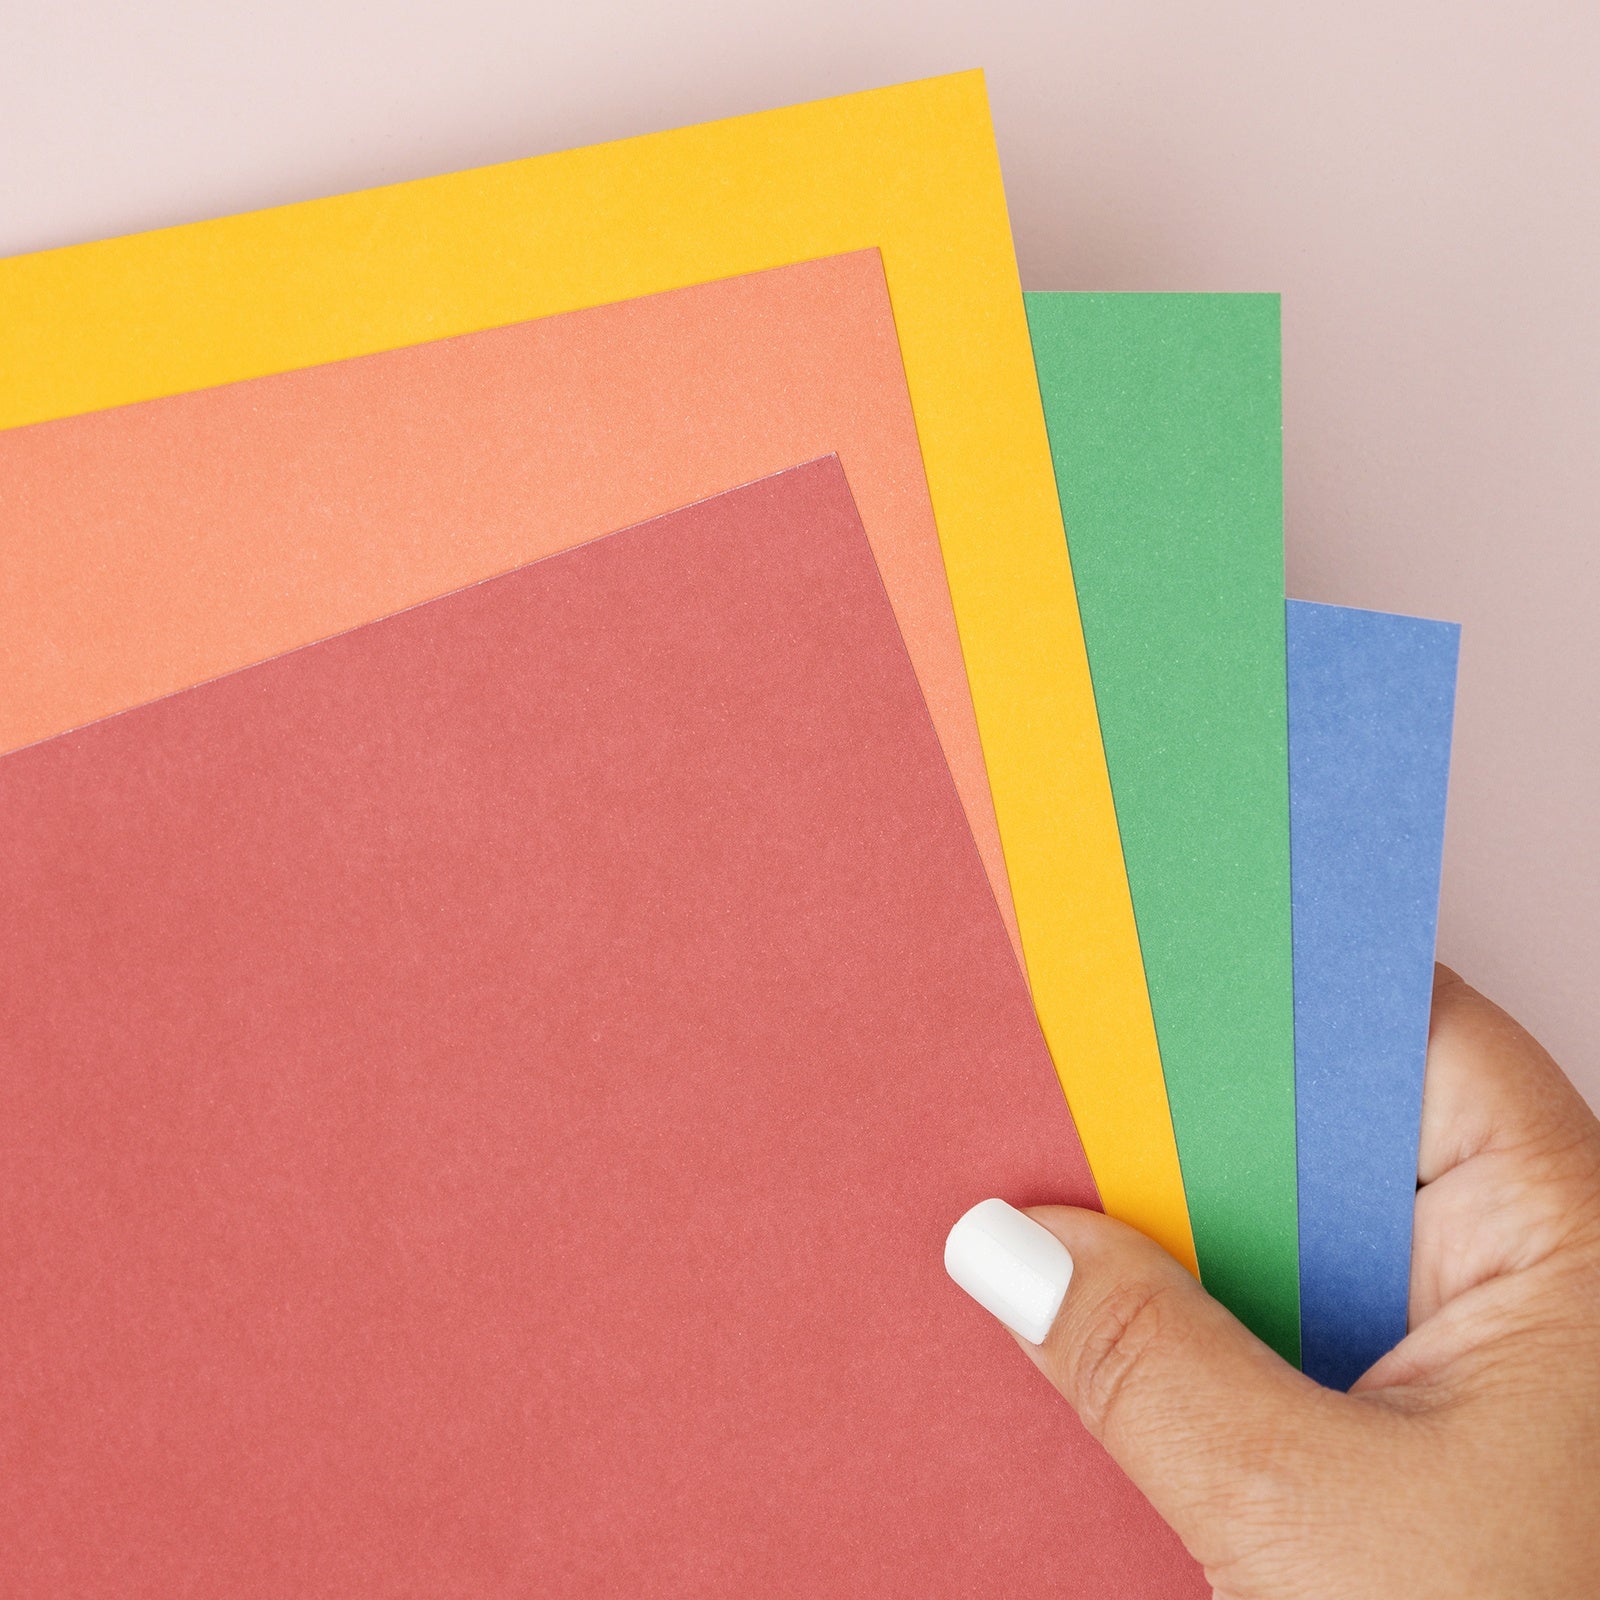 Colorbok® Marshmallow 8.5 x 11 Smooth Cardstock, 50 Sheets